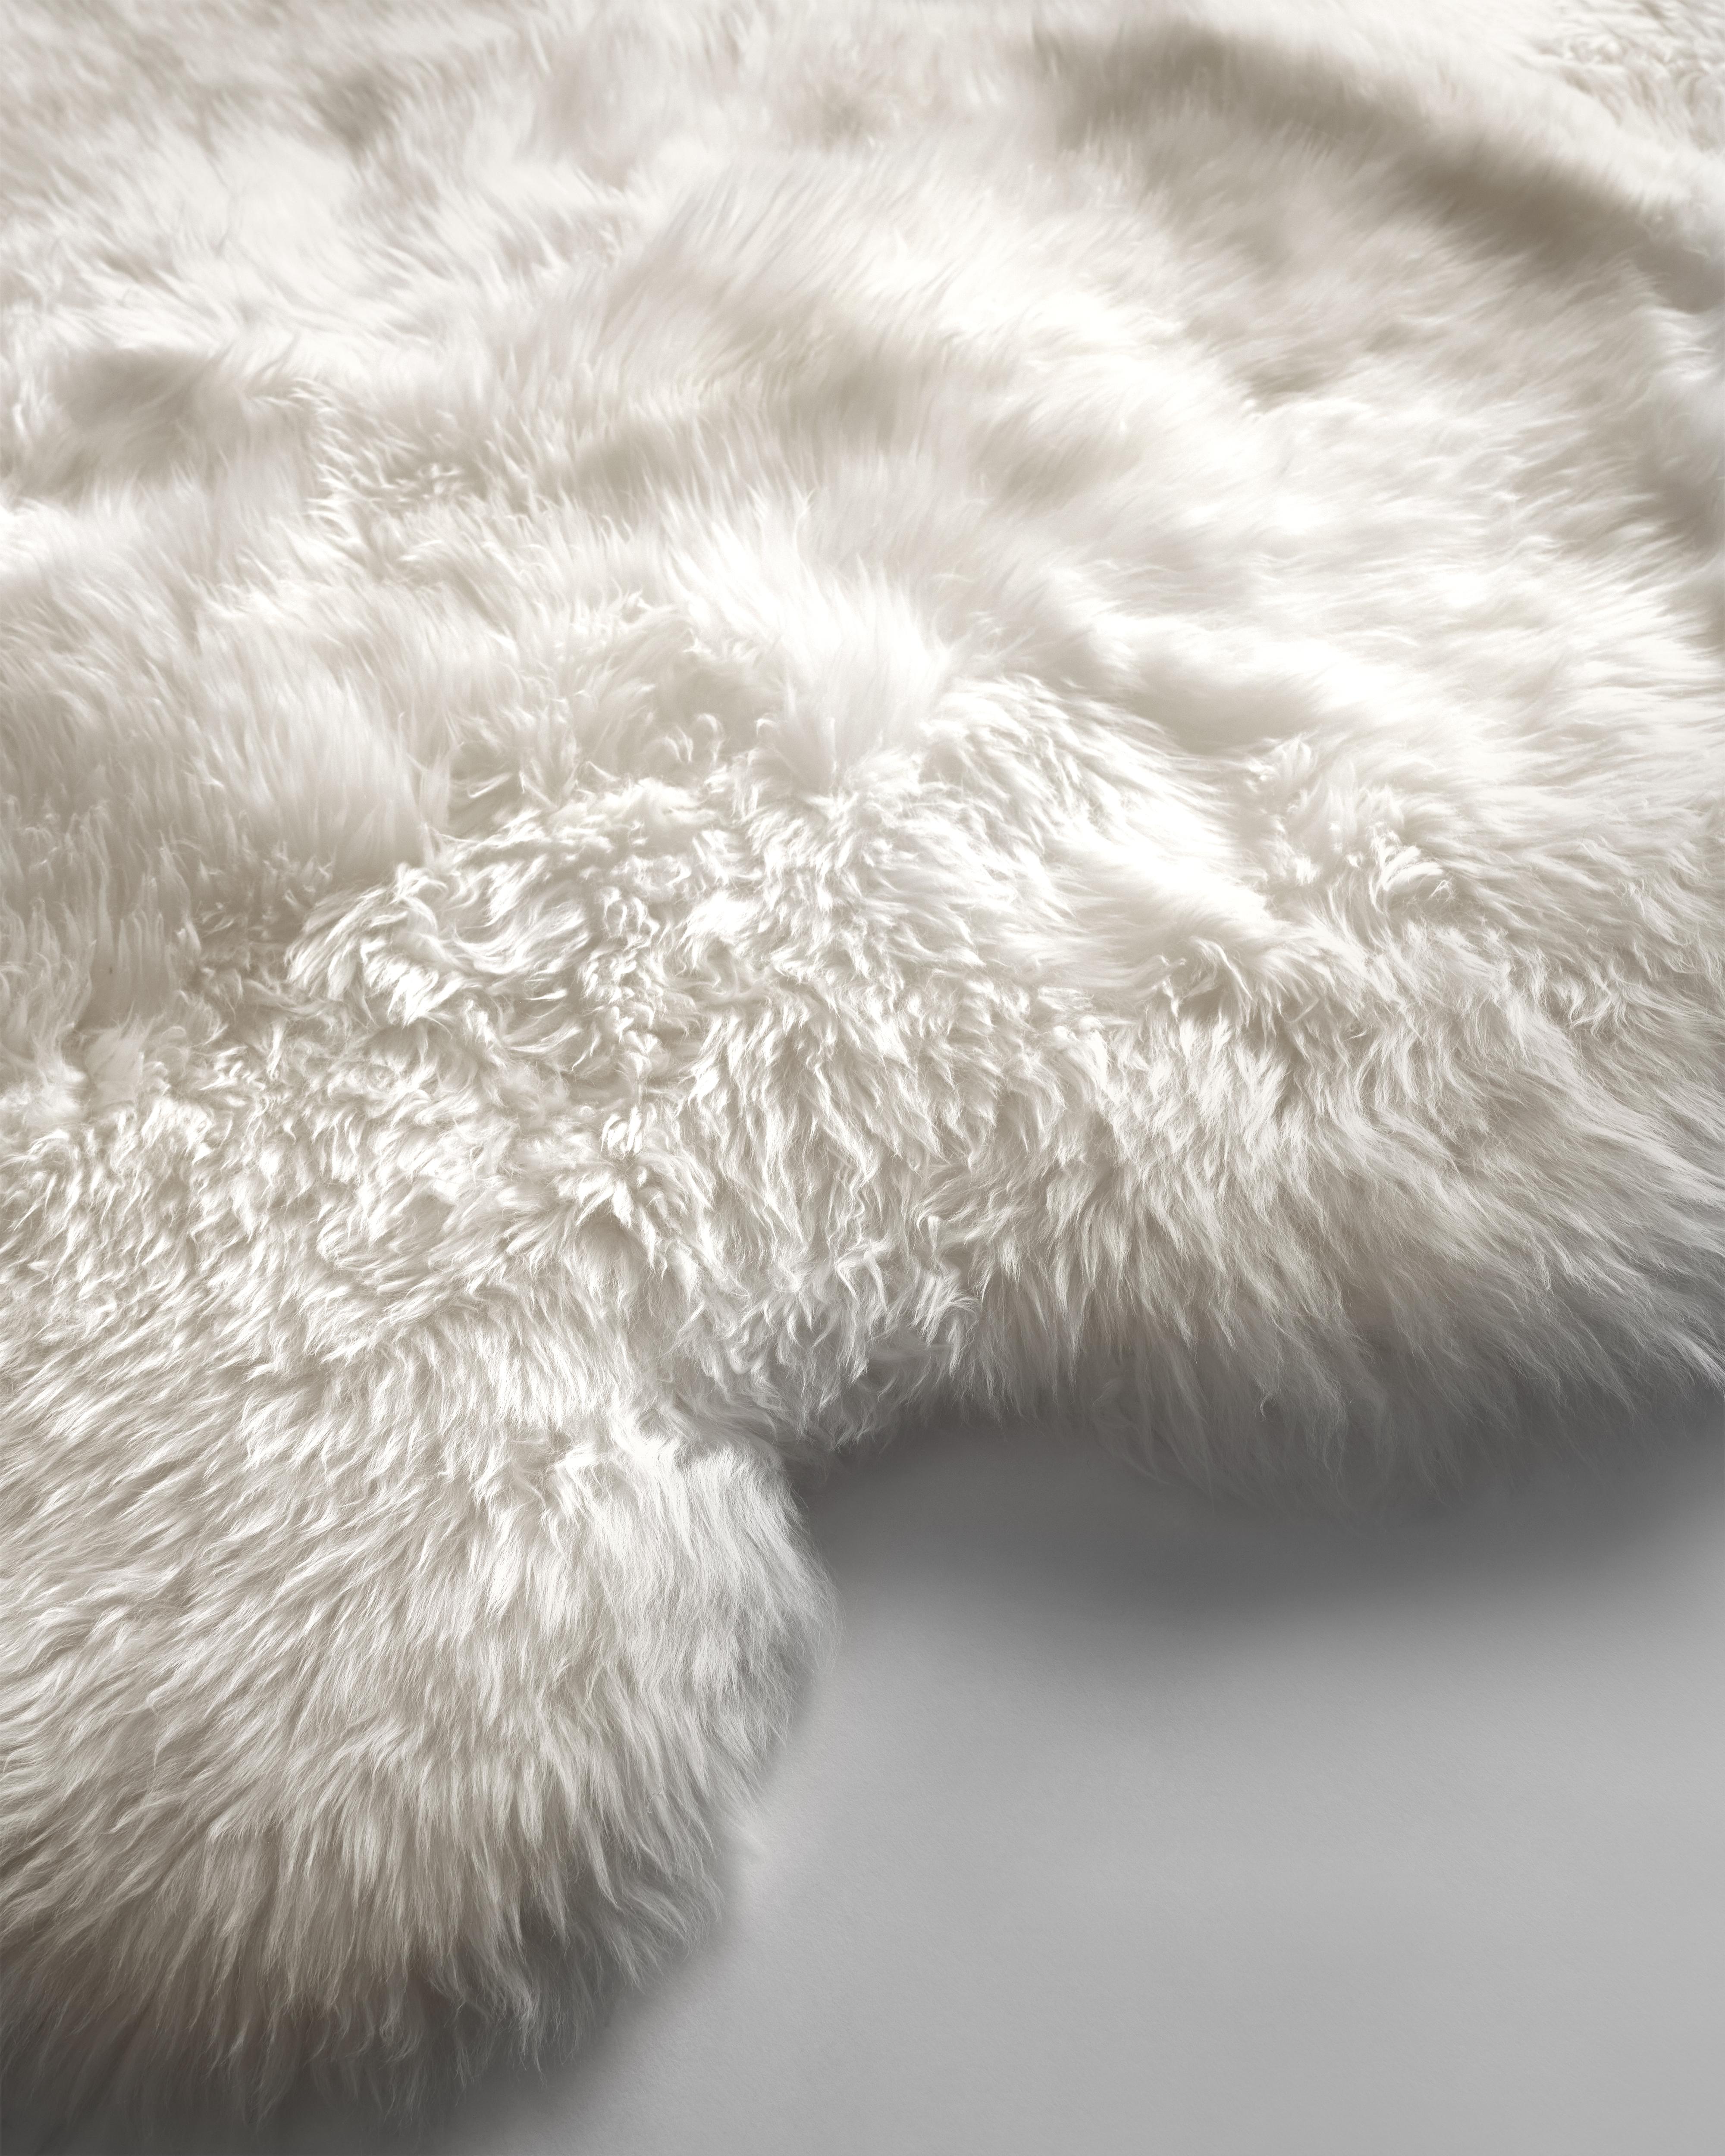 The naturalness and softness of a sheepskin rug can quickly elevate a room's beauty. On the floor, thrown over chairs and couches, this versatile design piece is a favorite of the Forsyth design team. 

This thick and beautiful sheepskin in ivory is